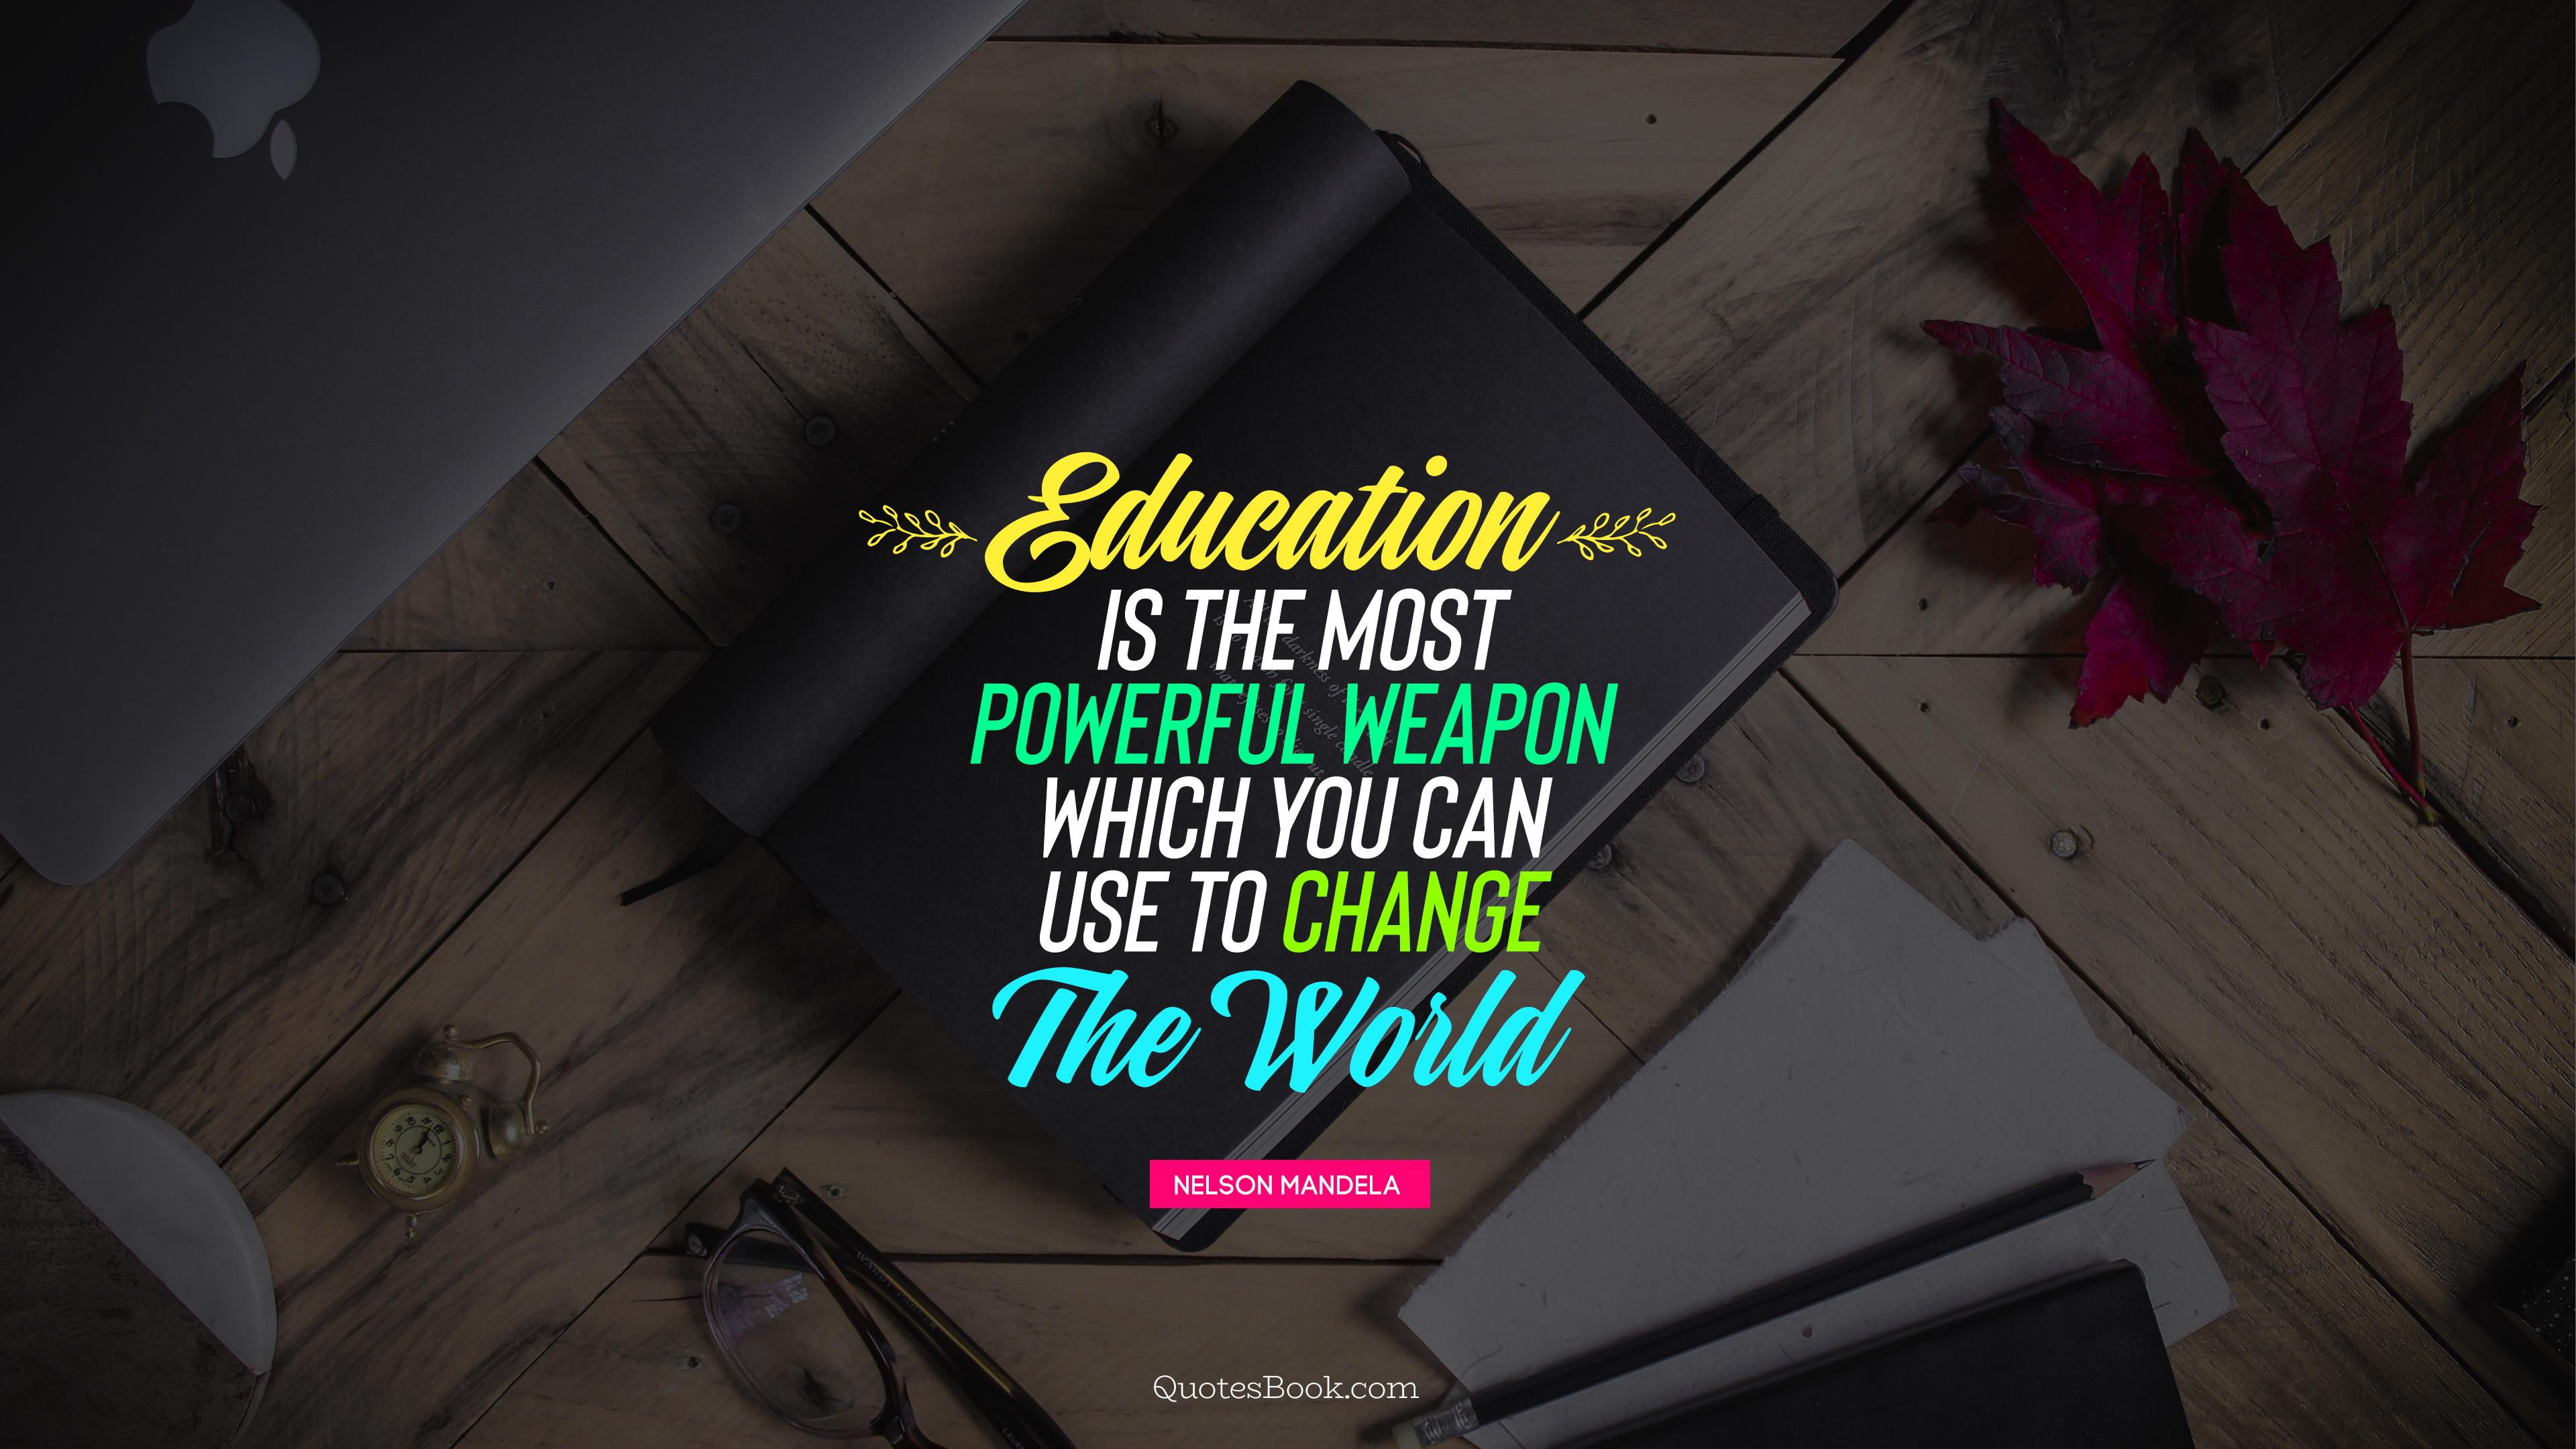 Education is the most powerful weapon which you can use to change the